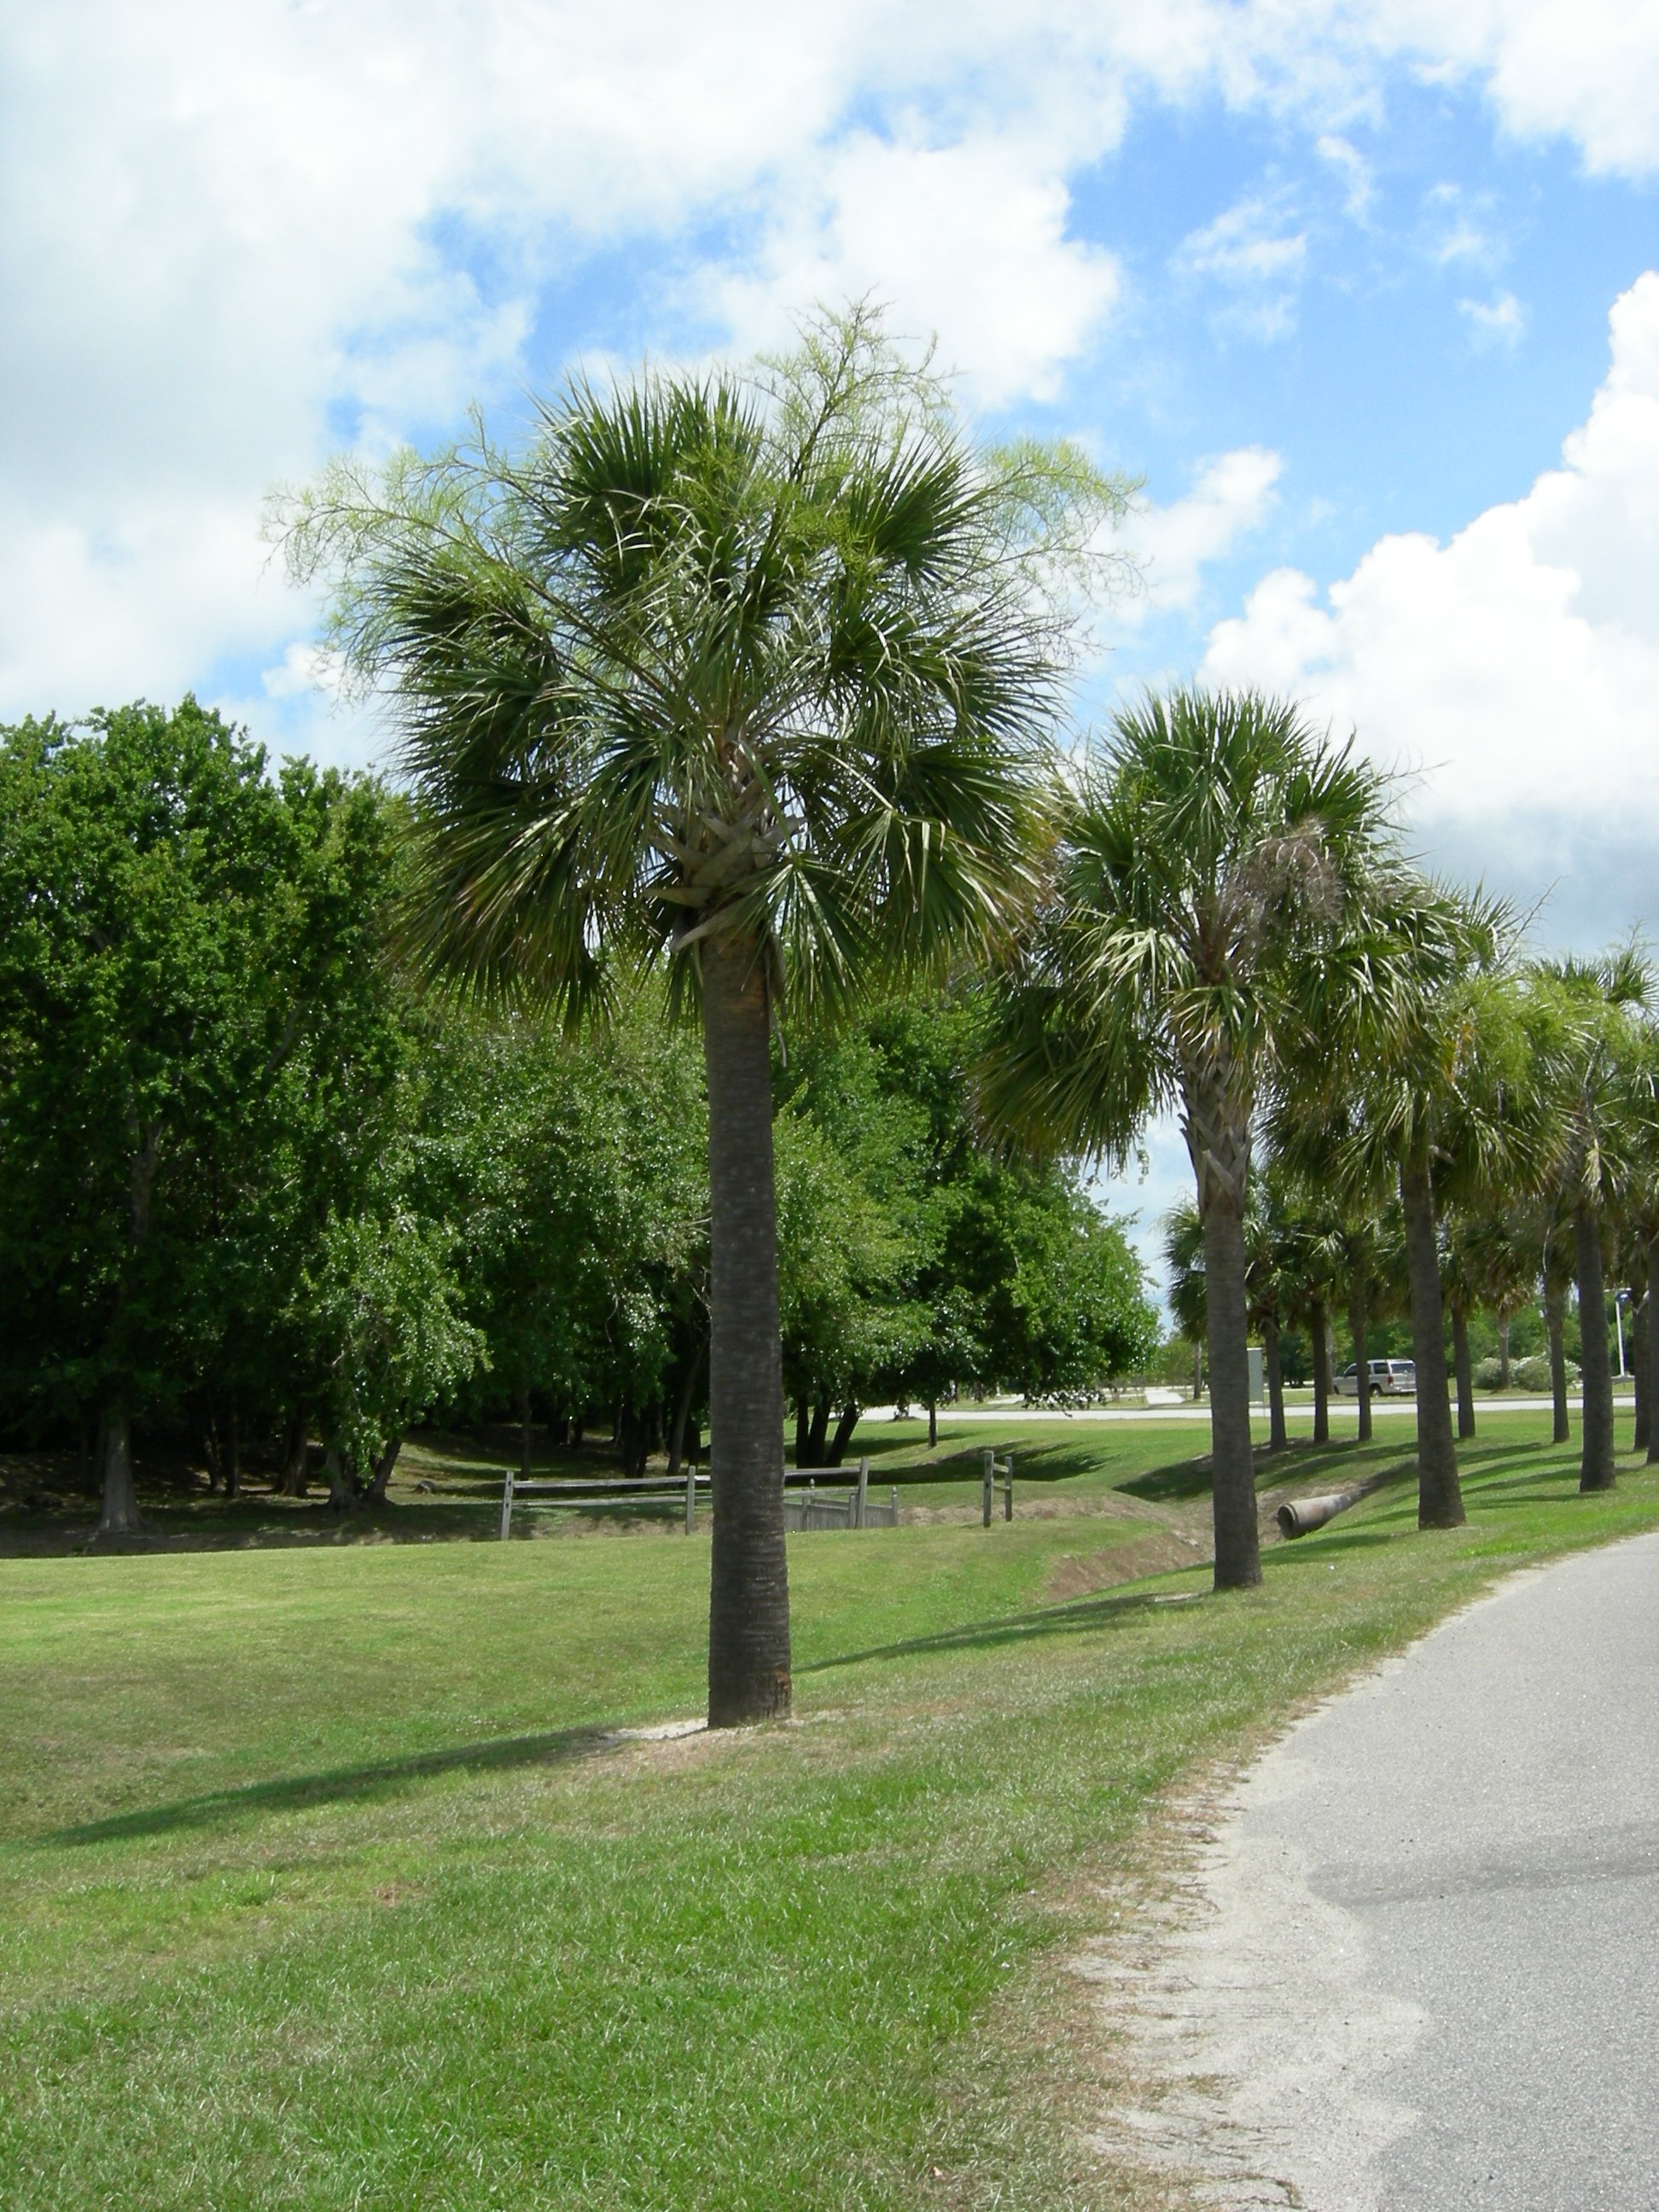 This is an image of a palmetto tree